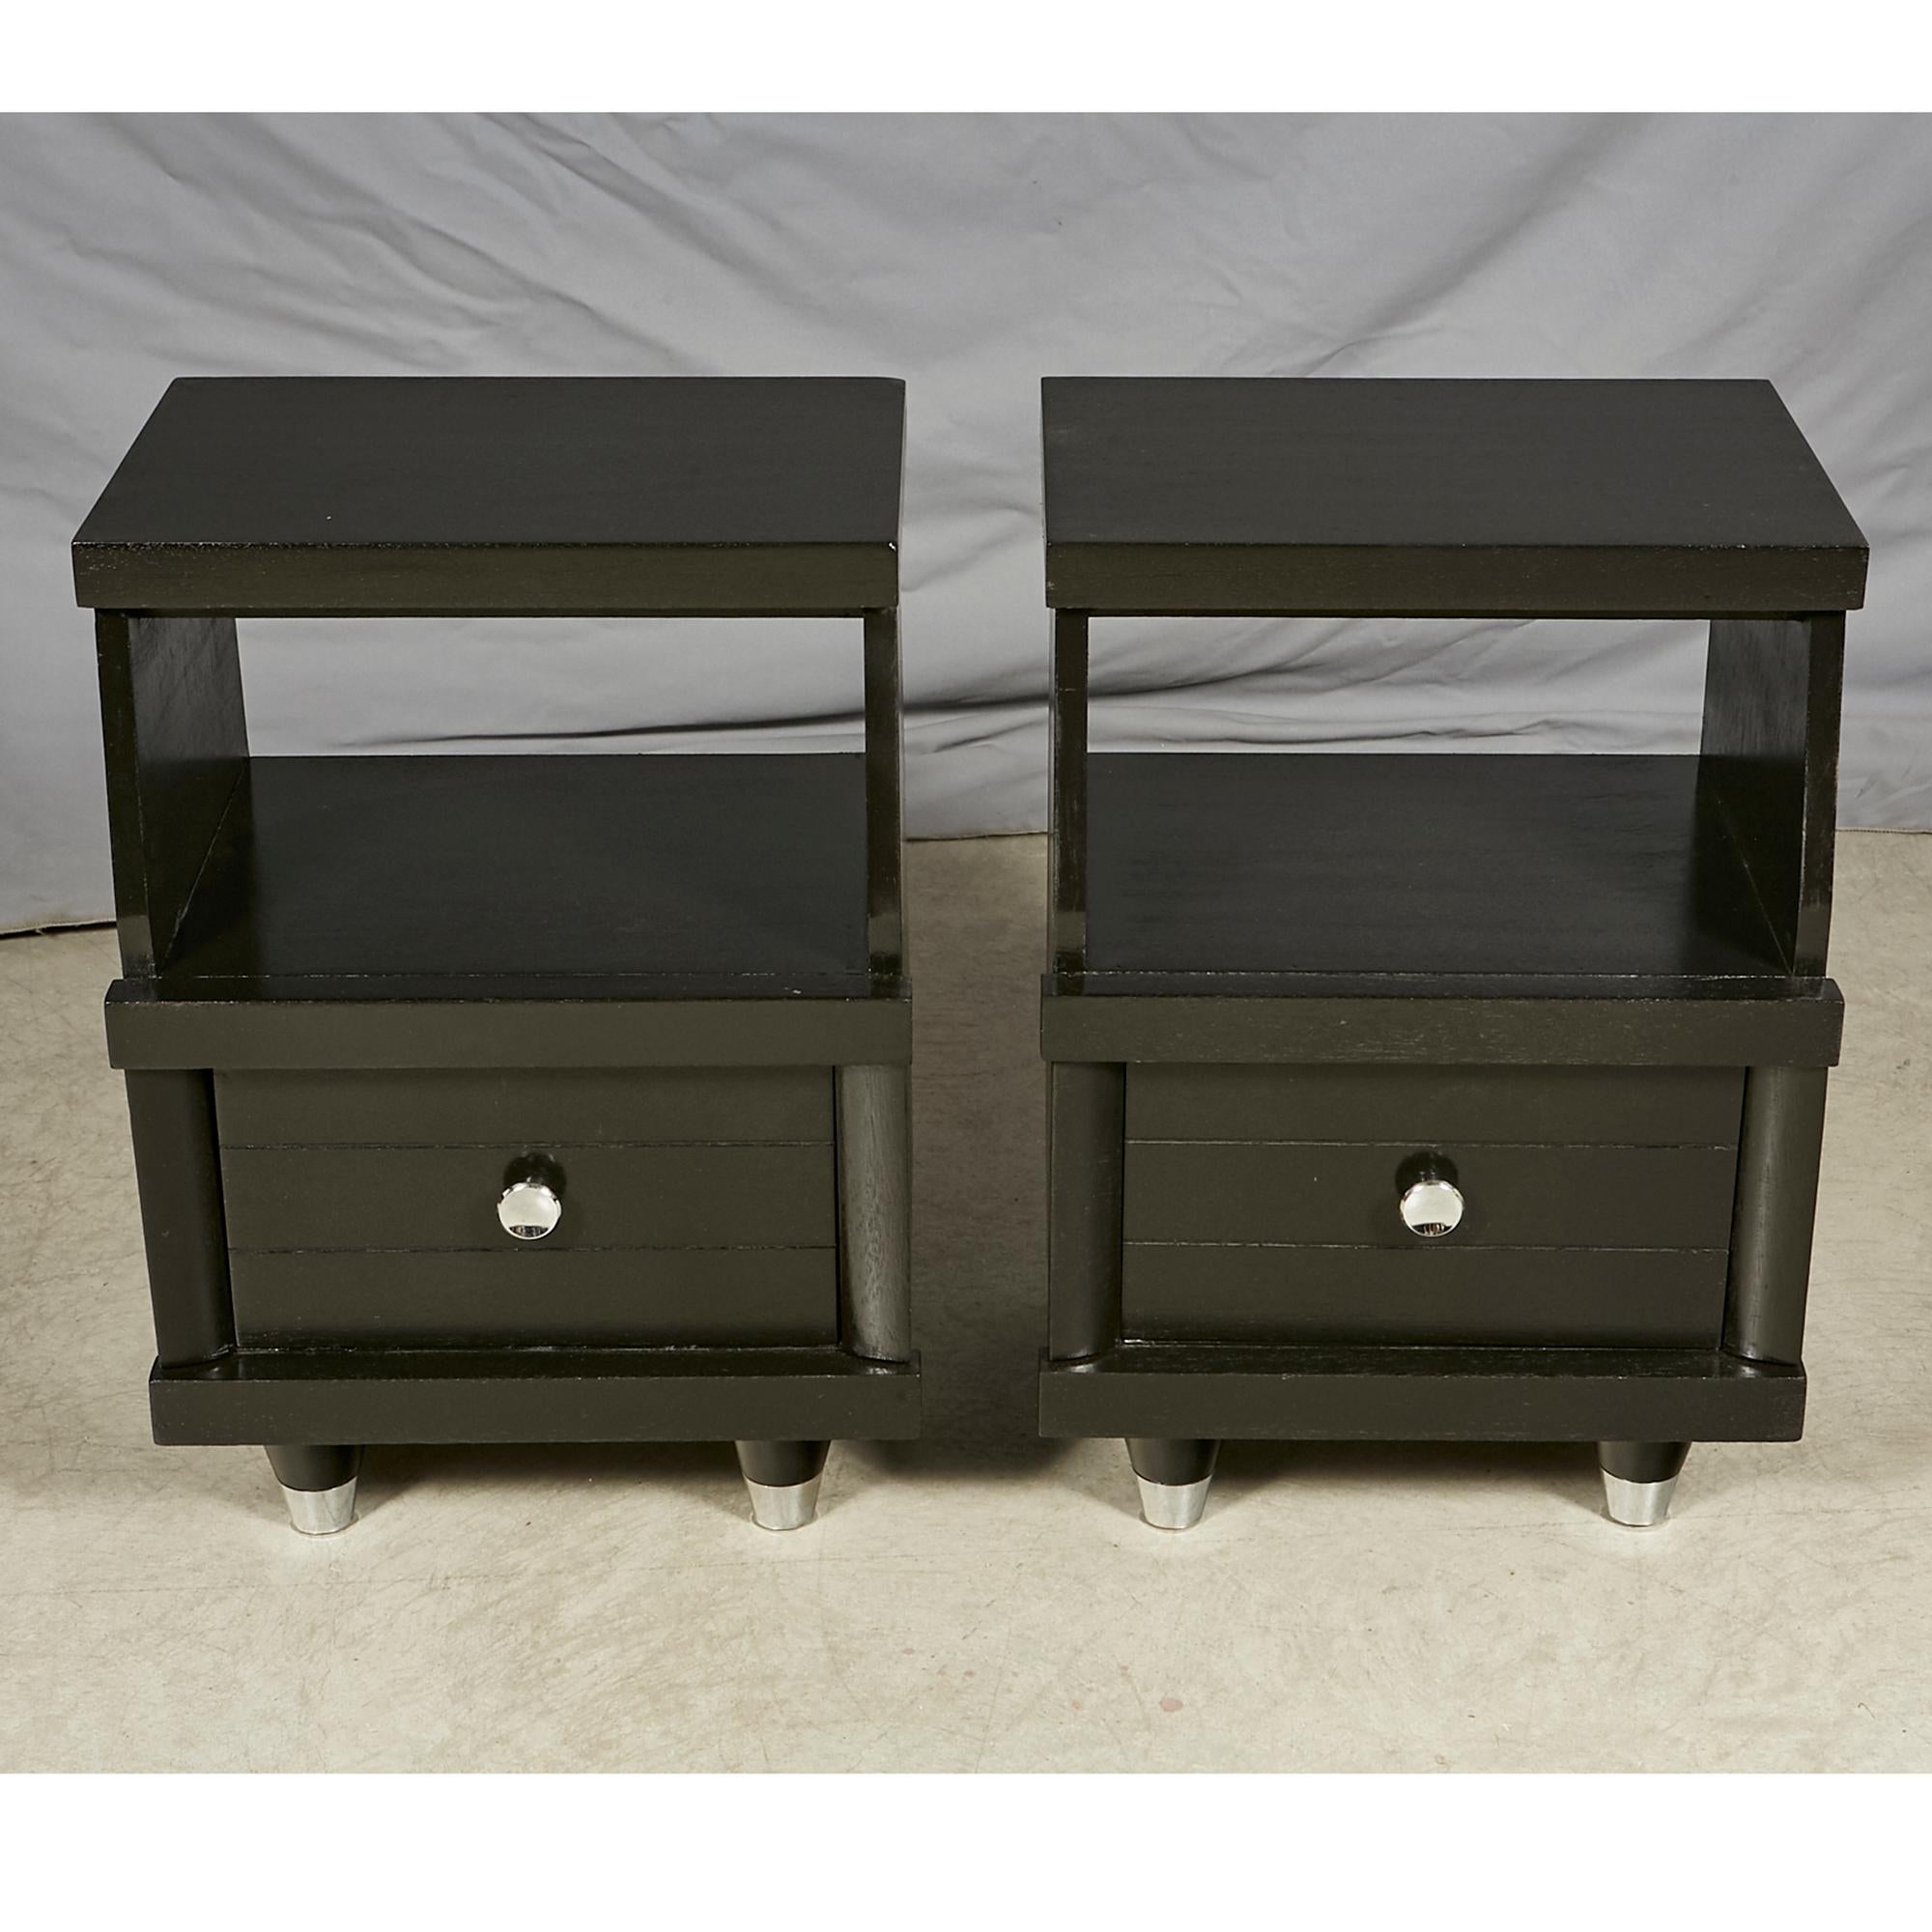 Vintage 1960s pair of black lacquered nightstands with a single drawer for storage. The nightstands have chrome metal accents. Newly refinished and in excellent condition.
      